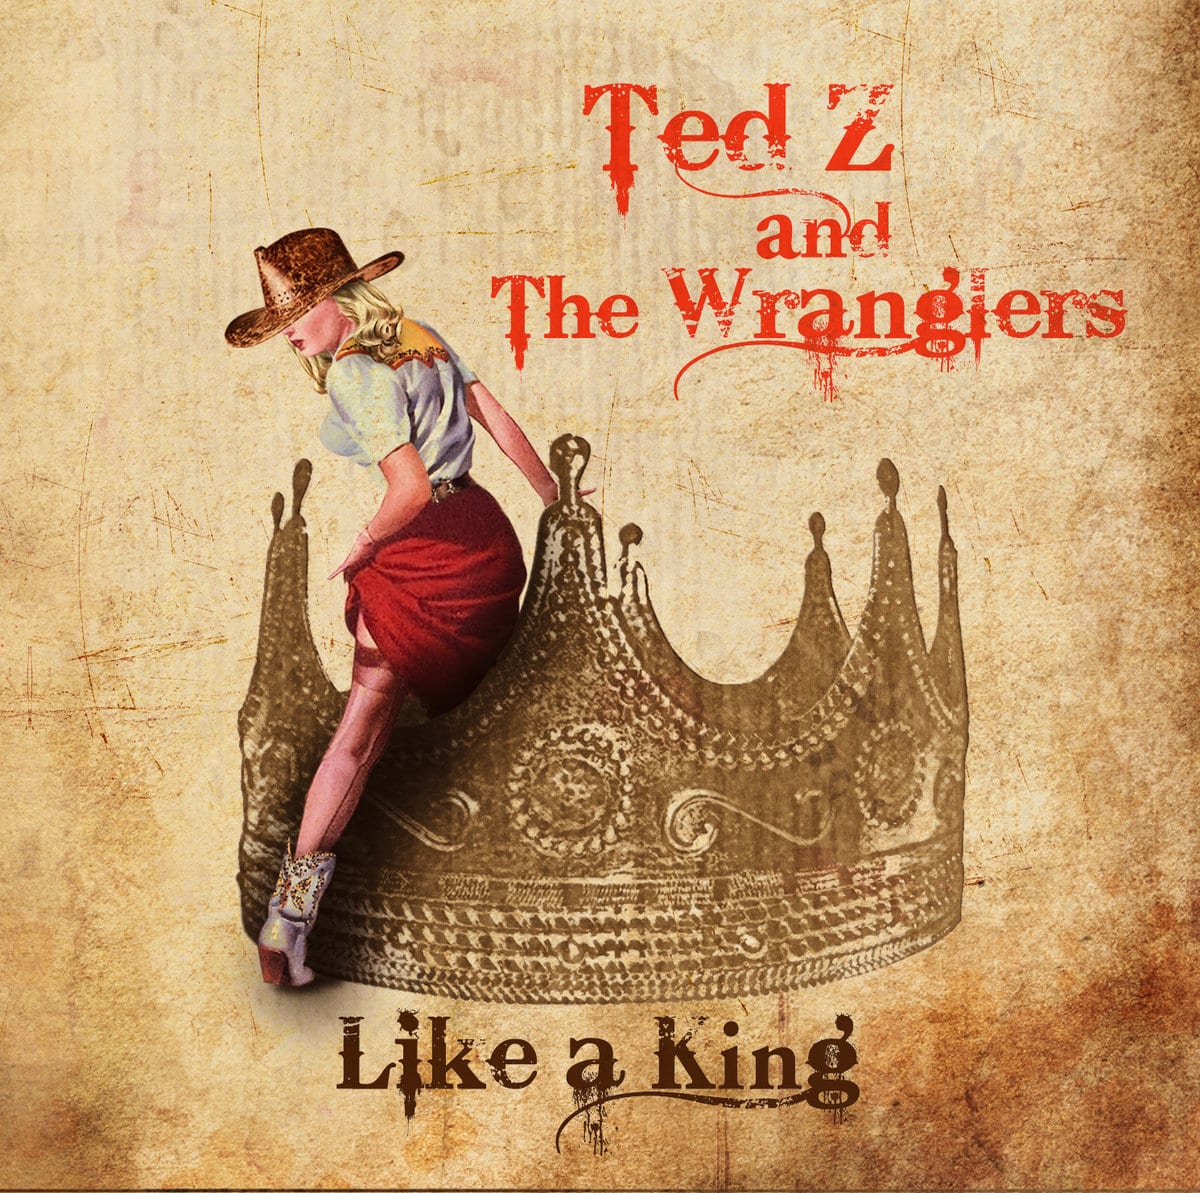 TED Z AND THE WRANGLERS – Like a king